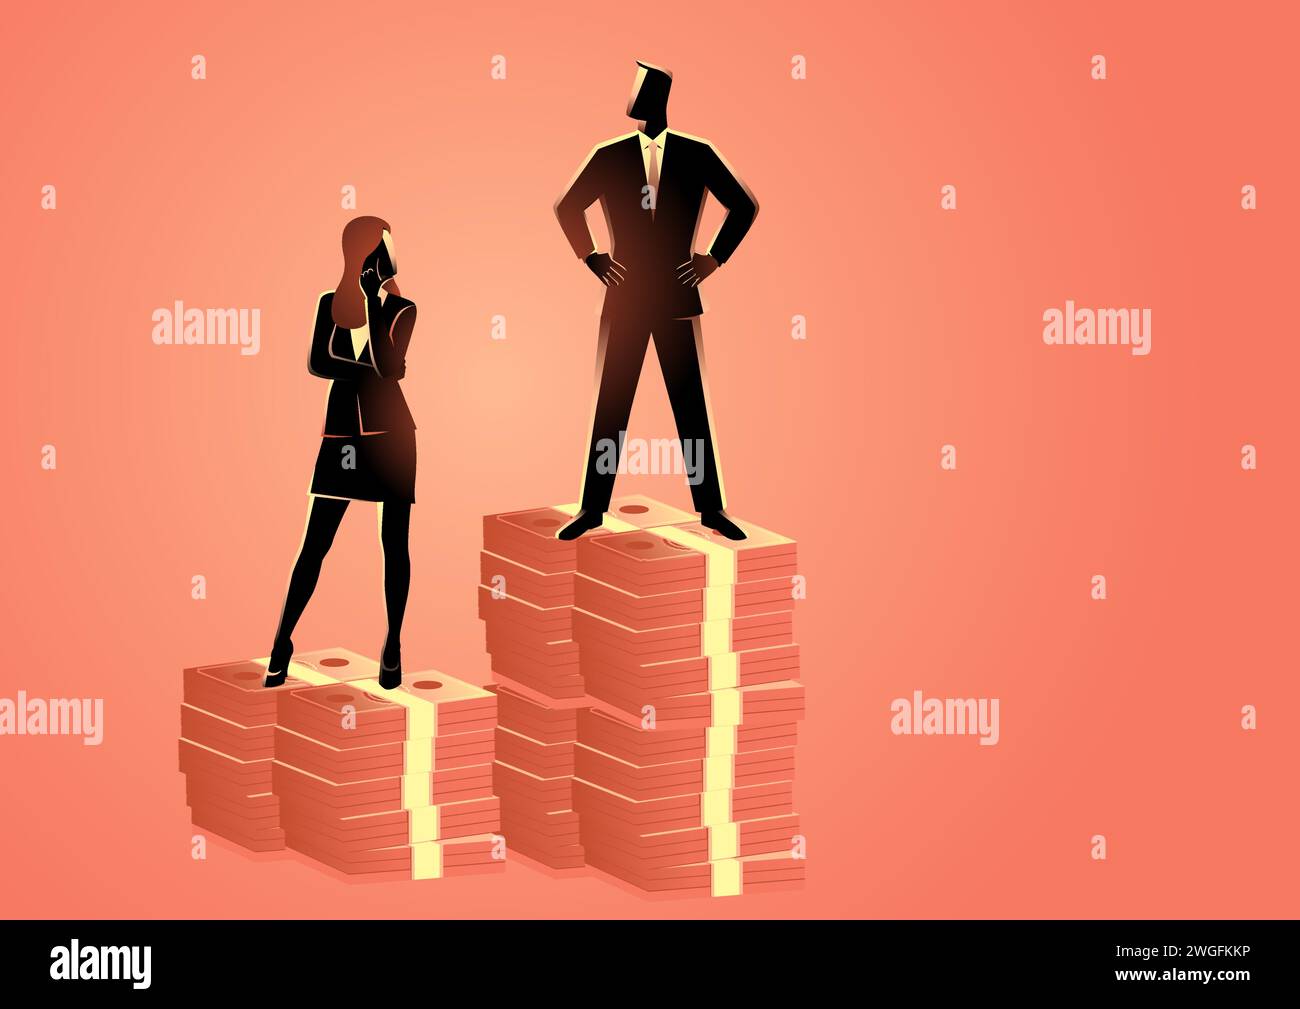 Businessman standing on higher stack of money than businesswoman, inequality between man and woman wage, gender issues in business Stock Vector